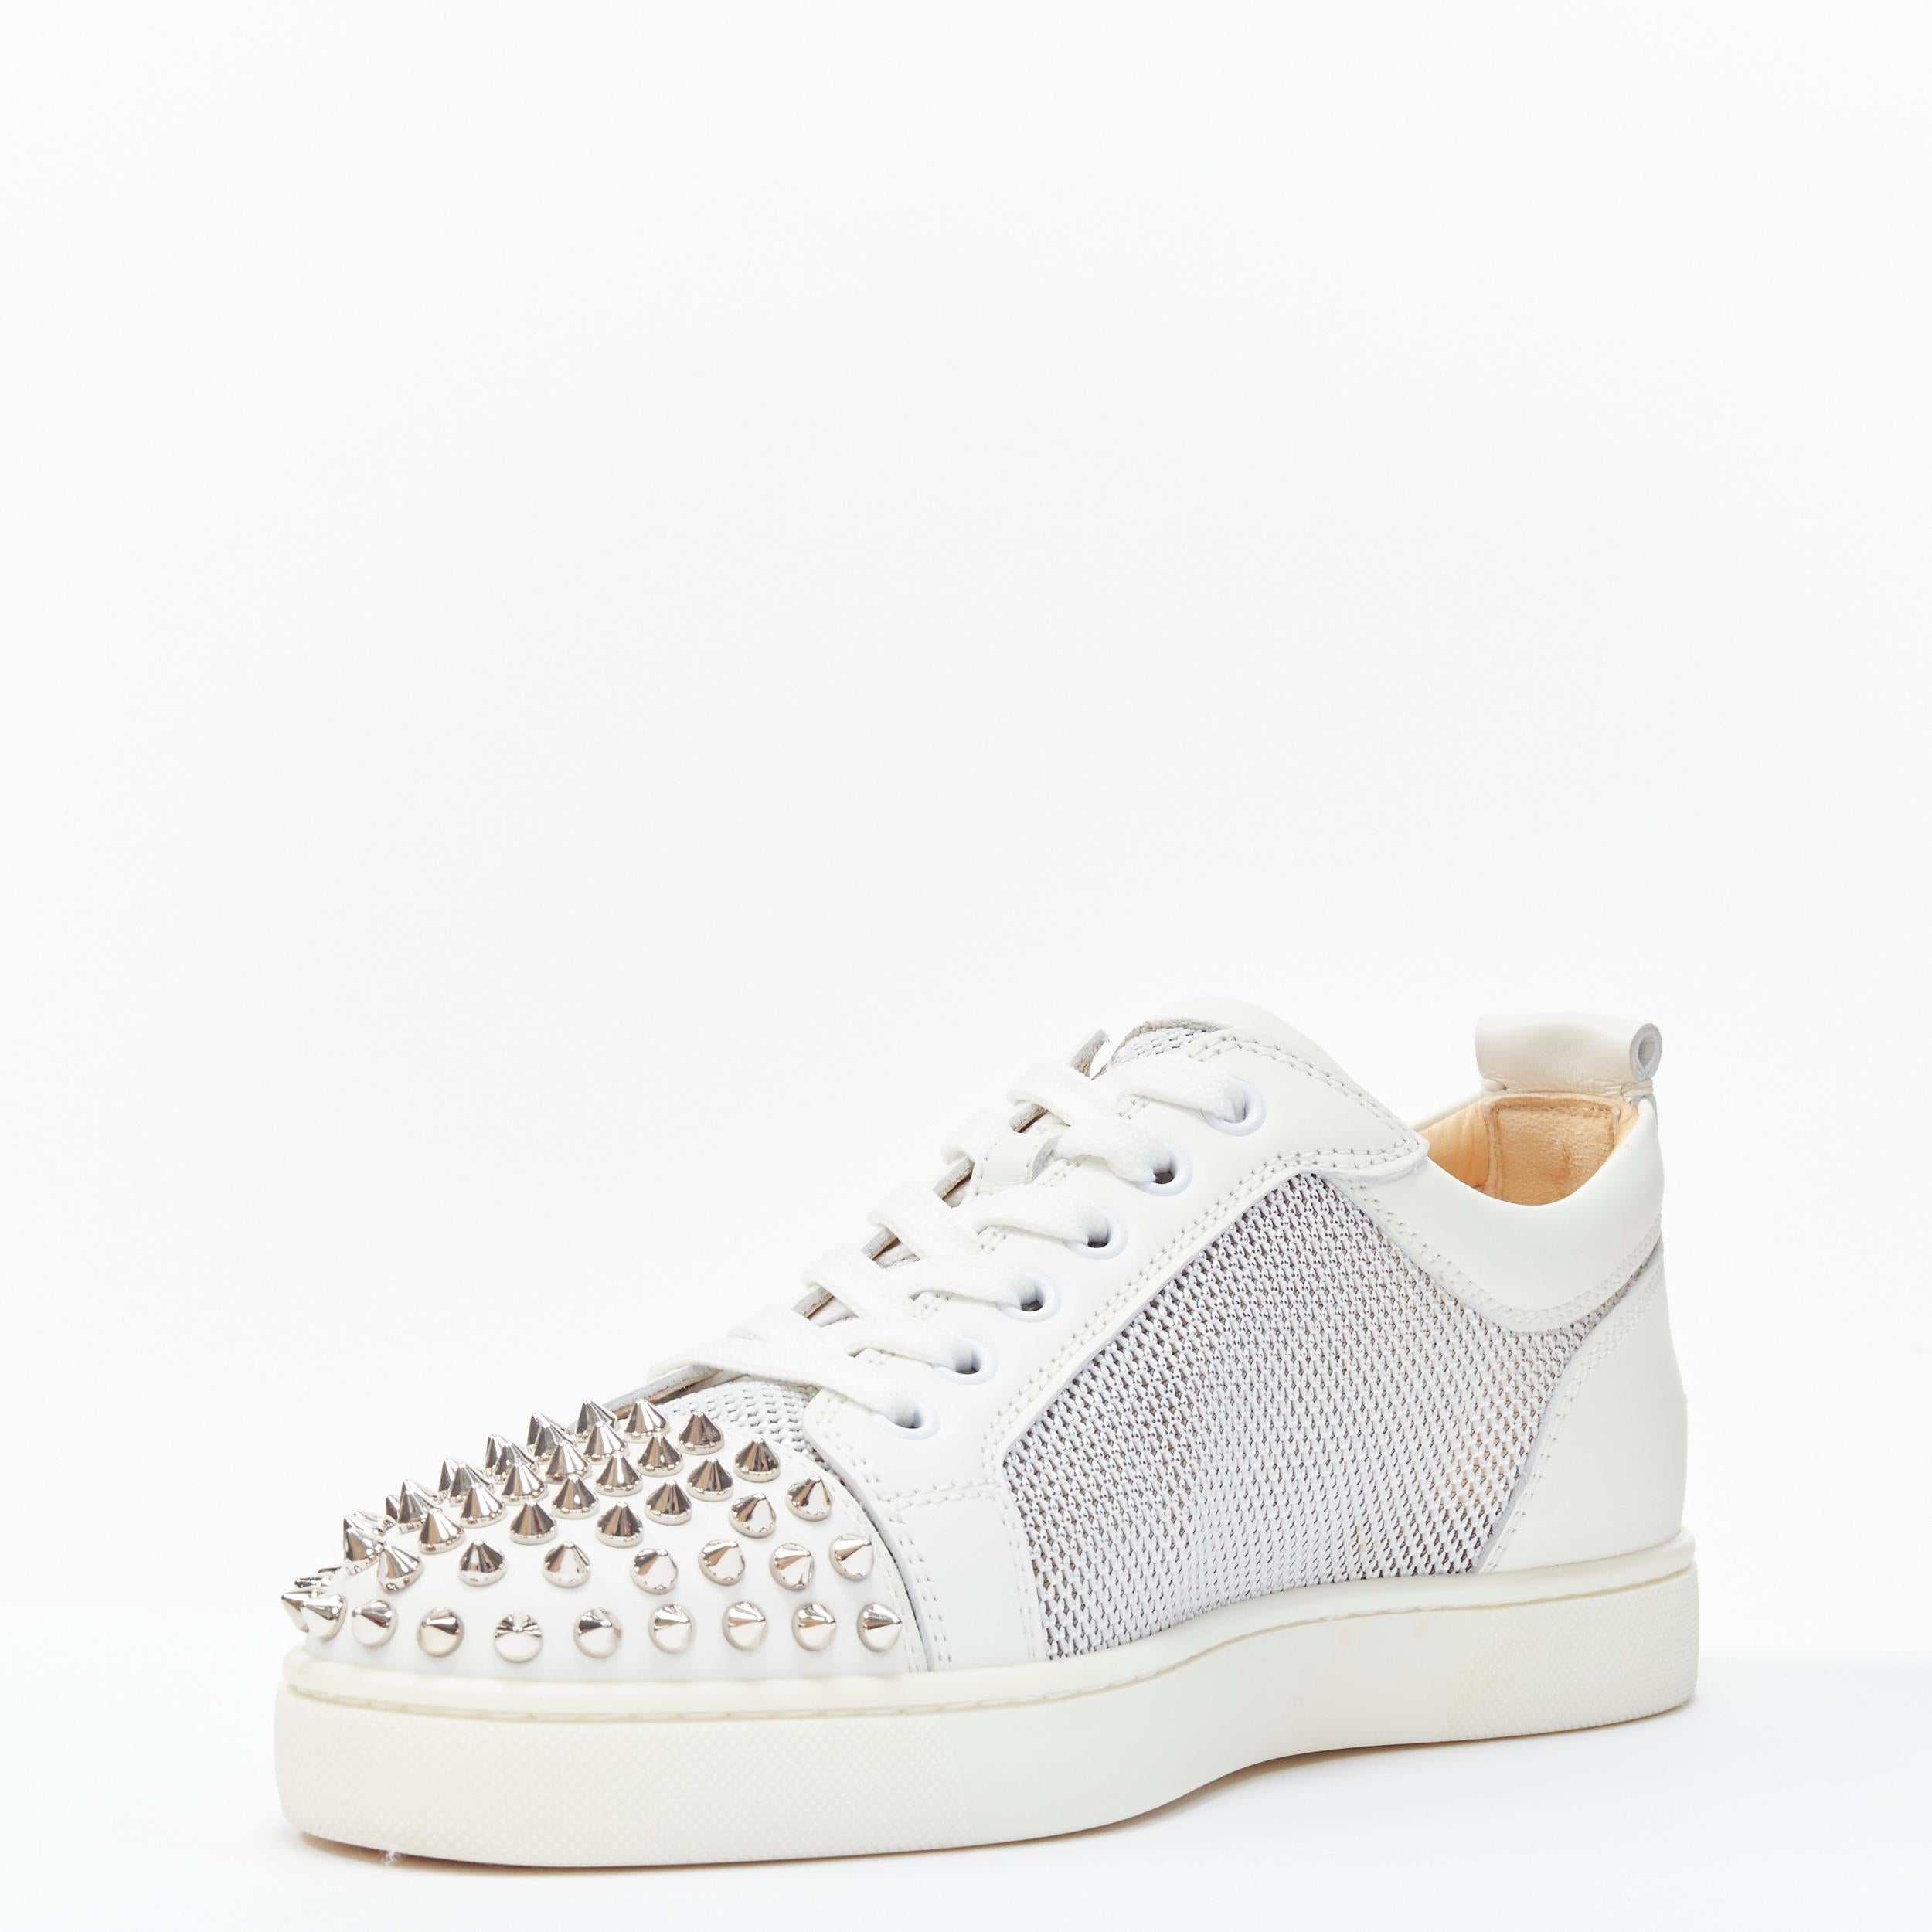 silver louboutin trainers